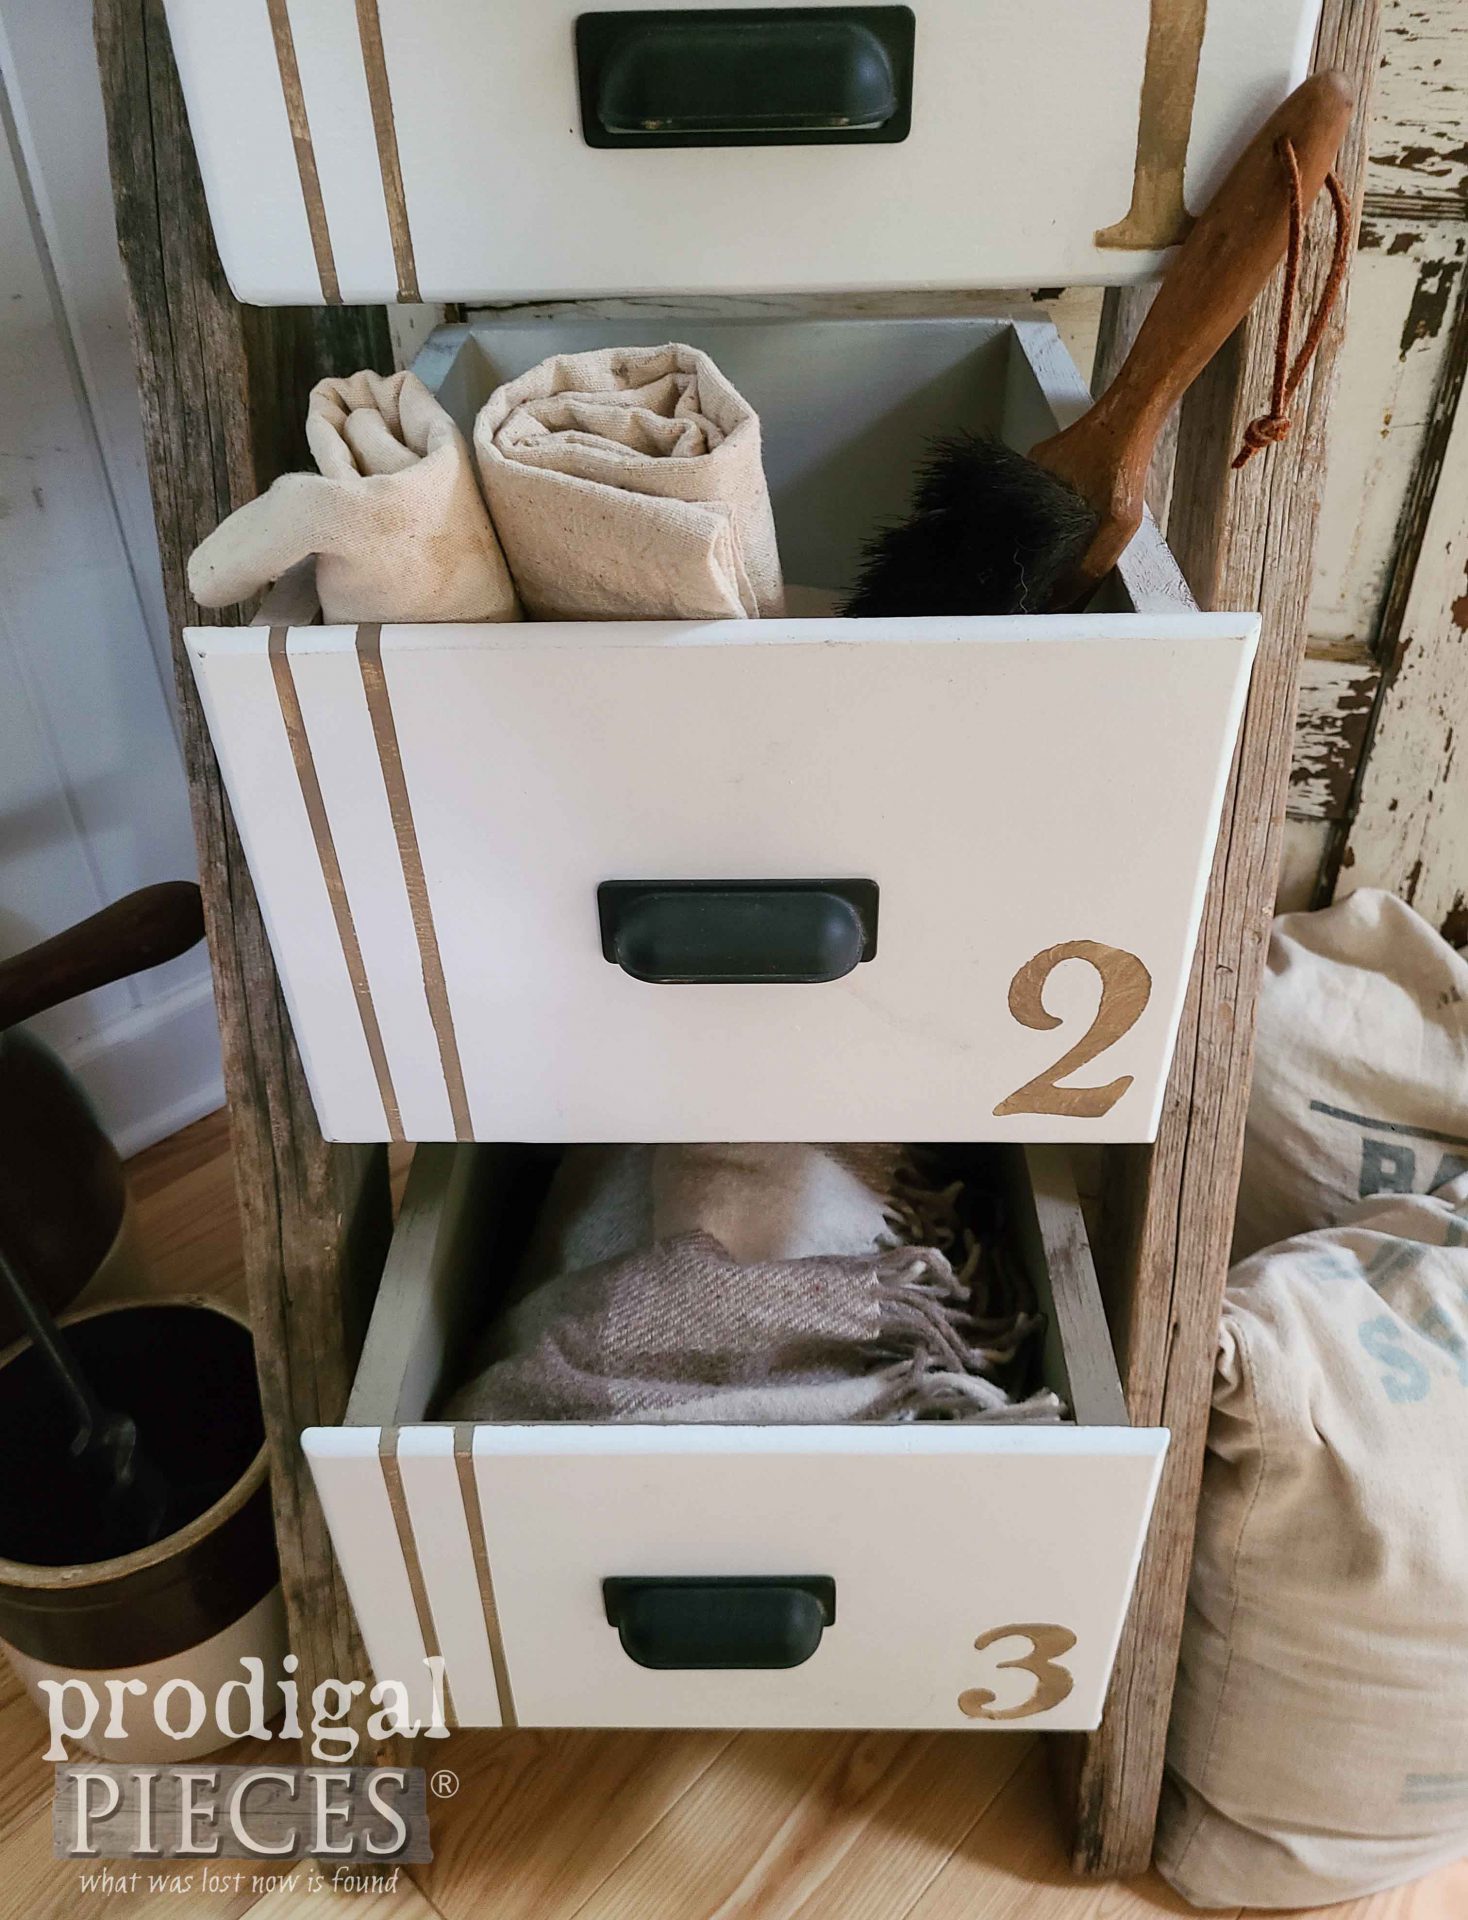 Numbered Tiered Drawer Stand Made from Reclaimed Ladder by Larissa of Prodigal Pieces | prodigalpieces.com #prodigalpieces #handmade #reclaimed #diy